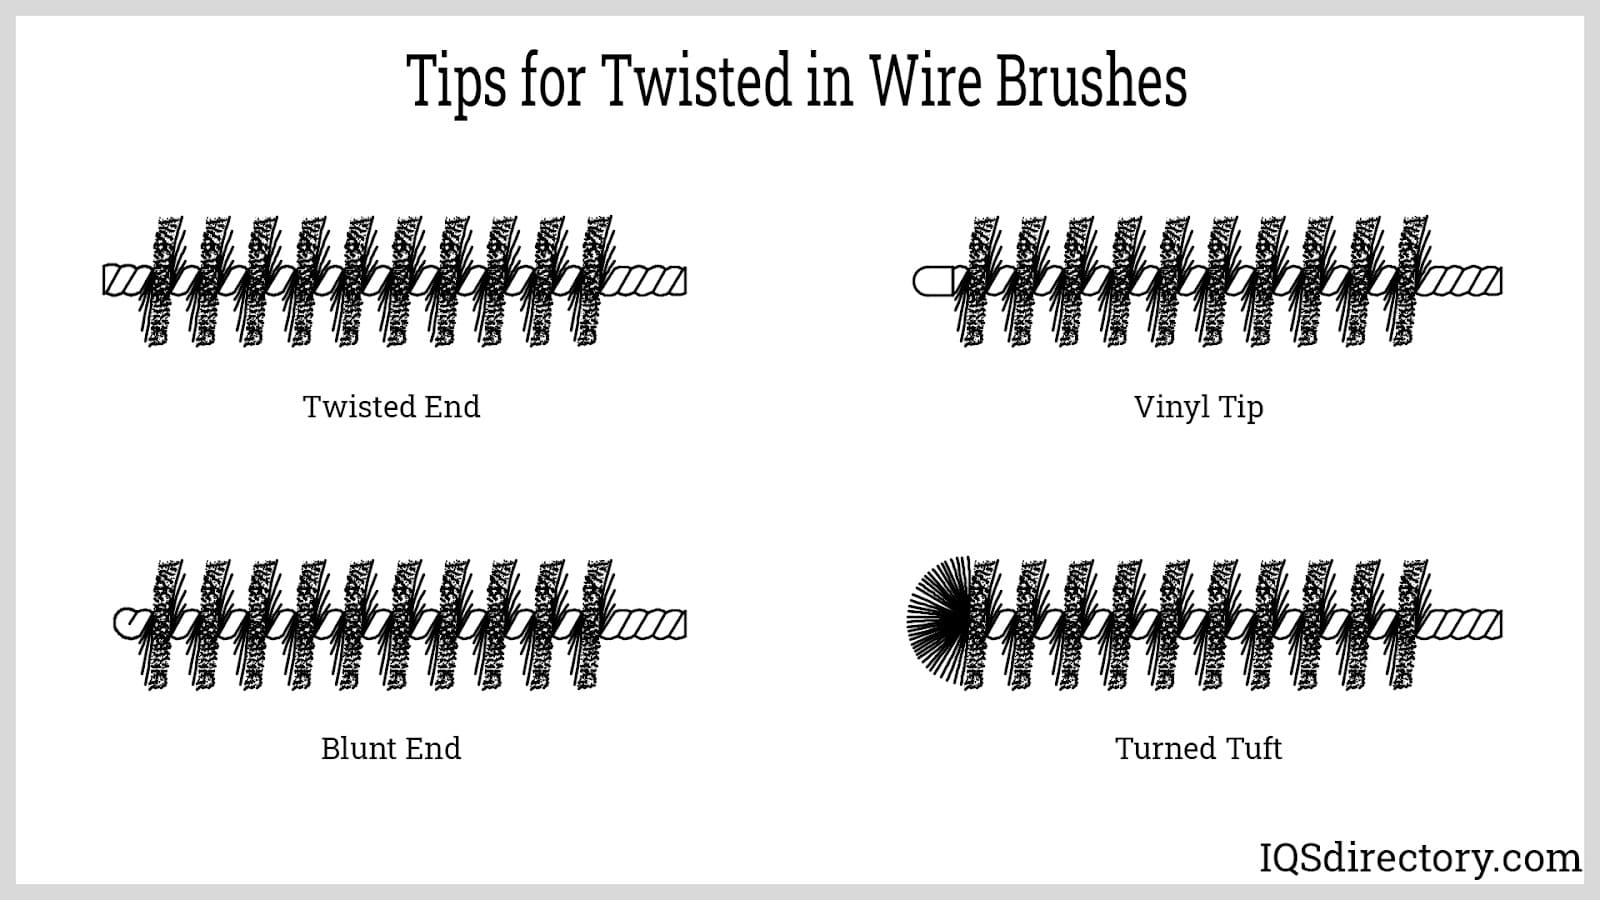 Tips for Twisted in Wire Brushes